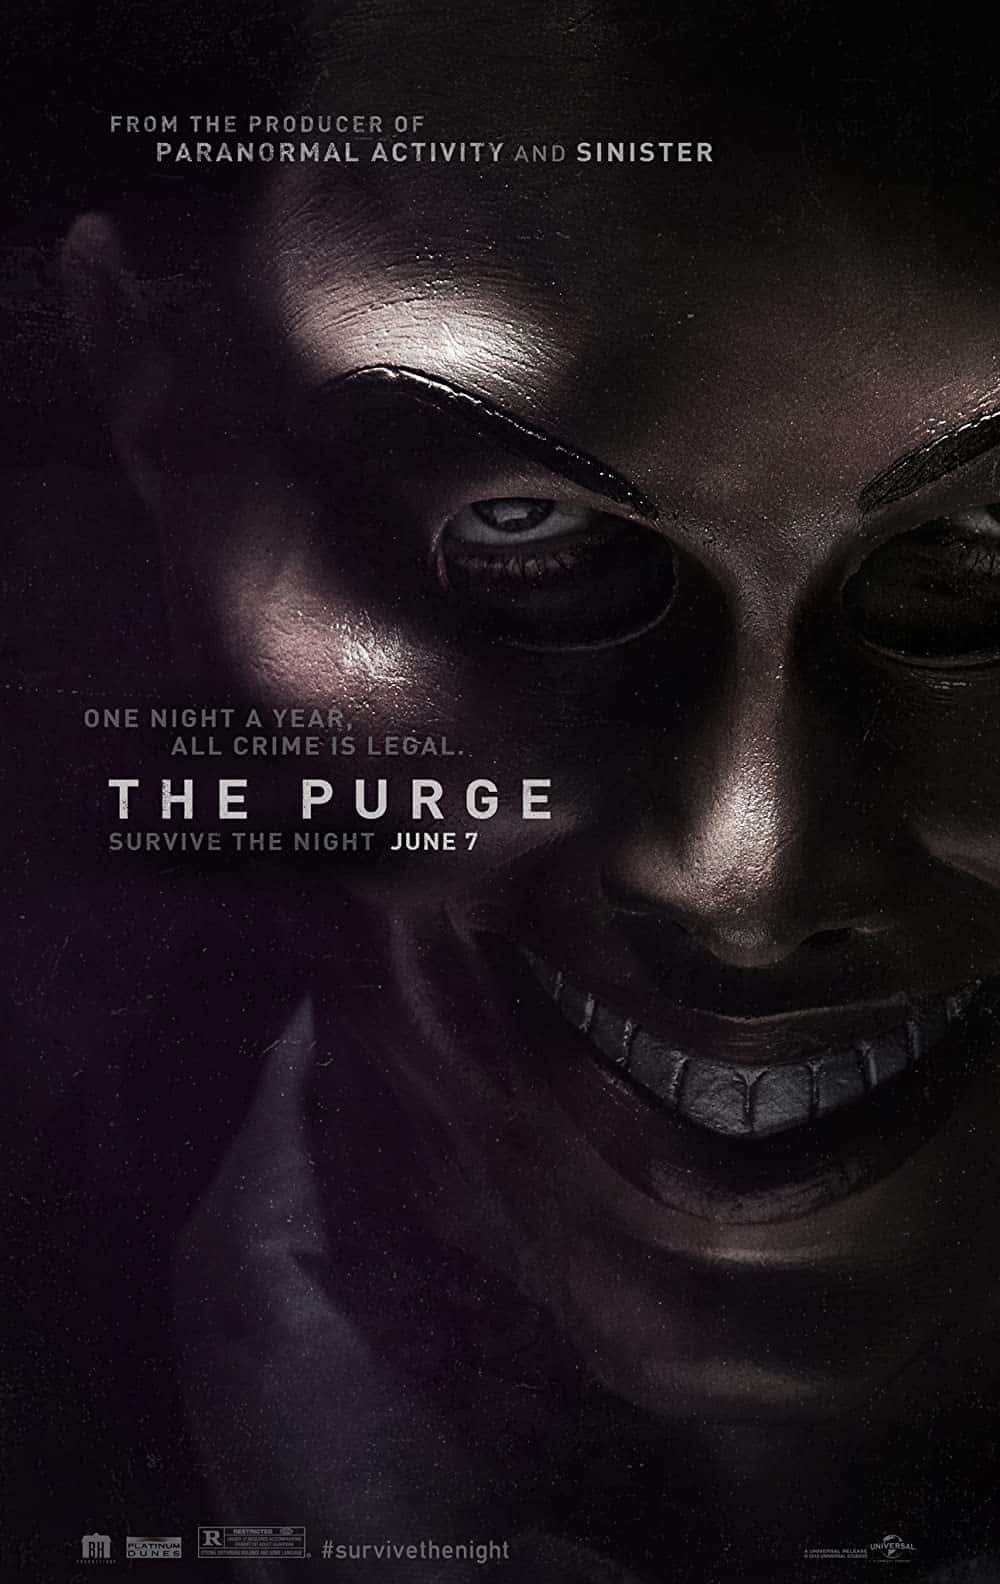 Us’ that You Must Watch similar movie The Purge (2013) 